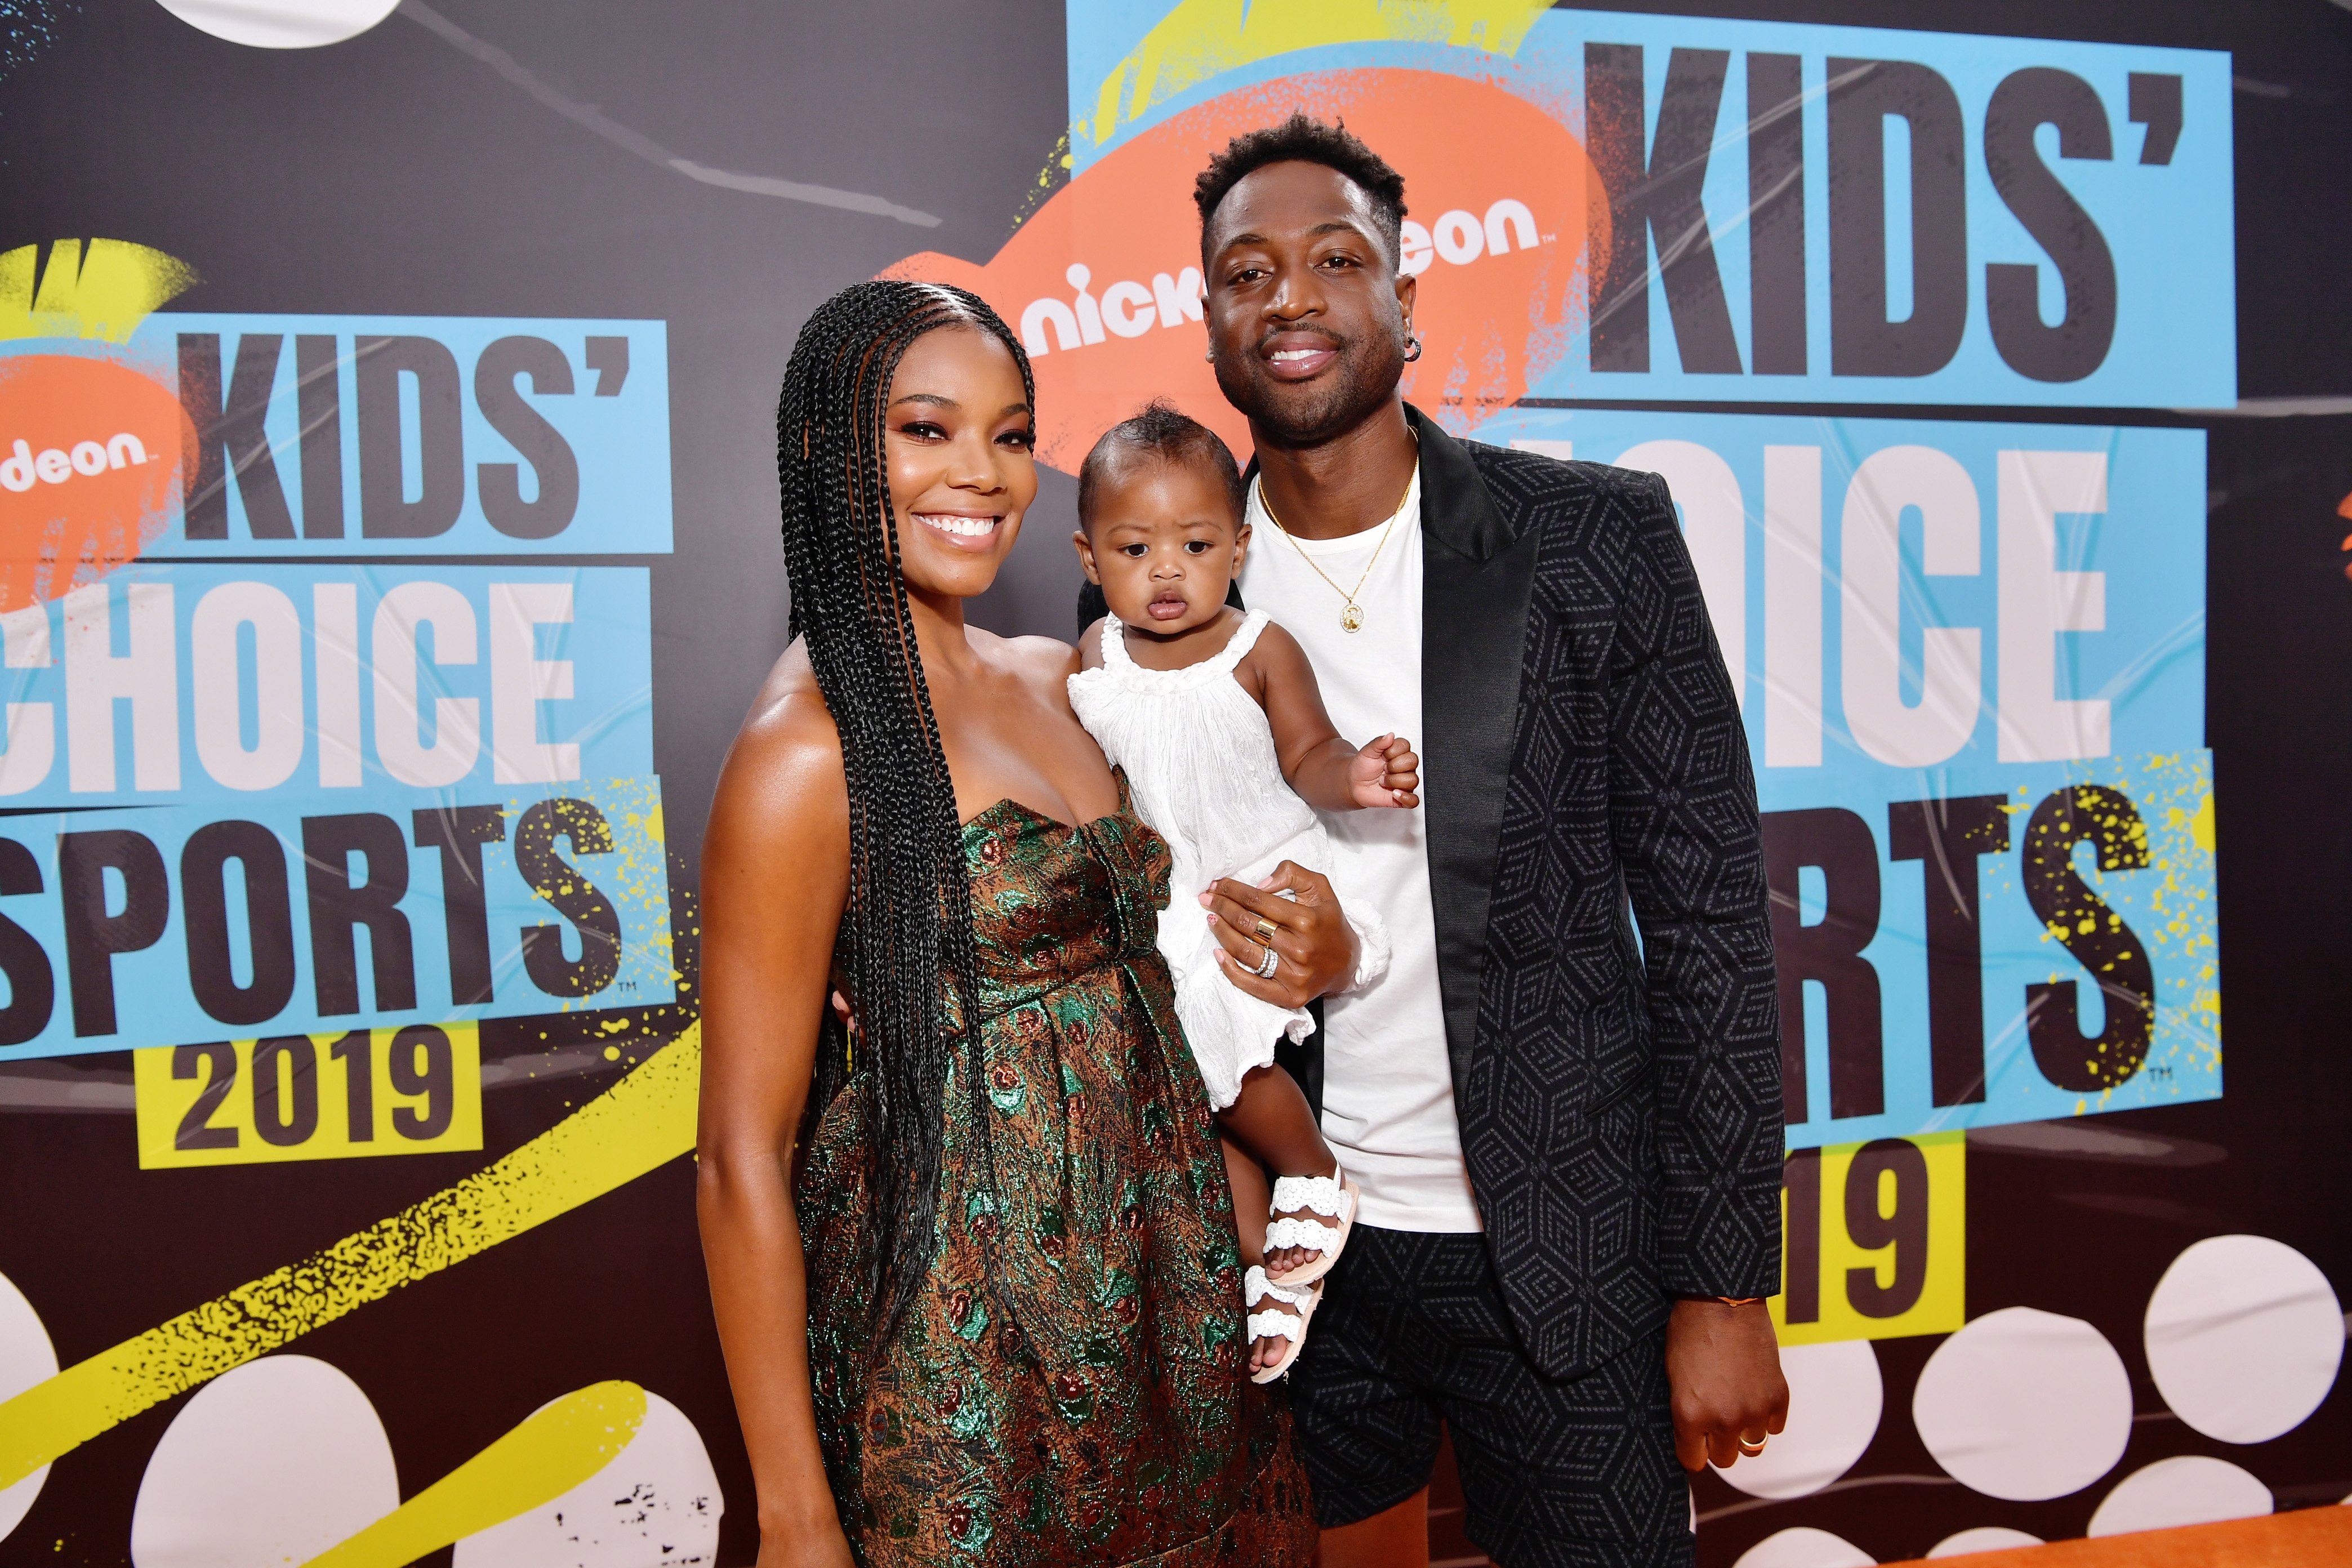 Gabrielle Union, Kaavia James Union Wade, and Dwyane Wade attend Nickelodeon Kids' Choice Sports 2019 at Barker Hangar on July 11, 2019| Photo: Getty Images